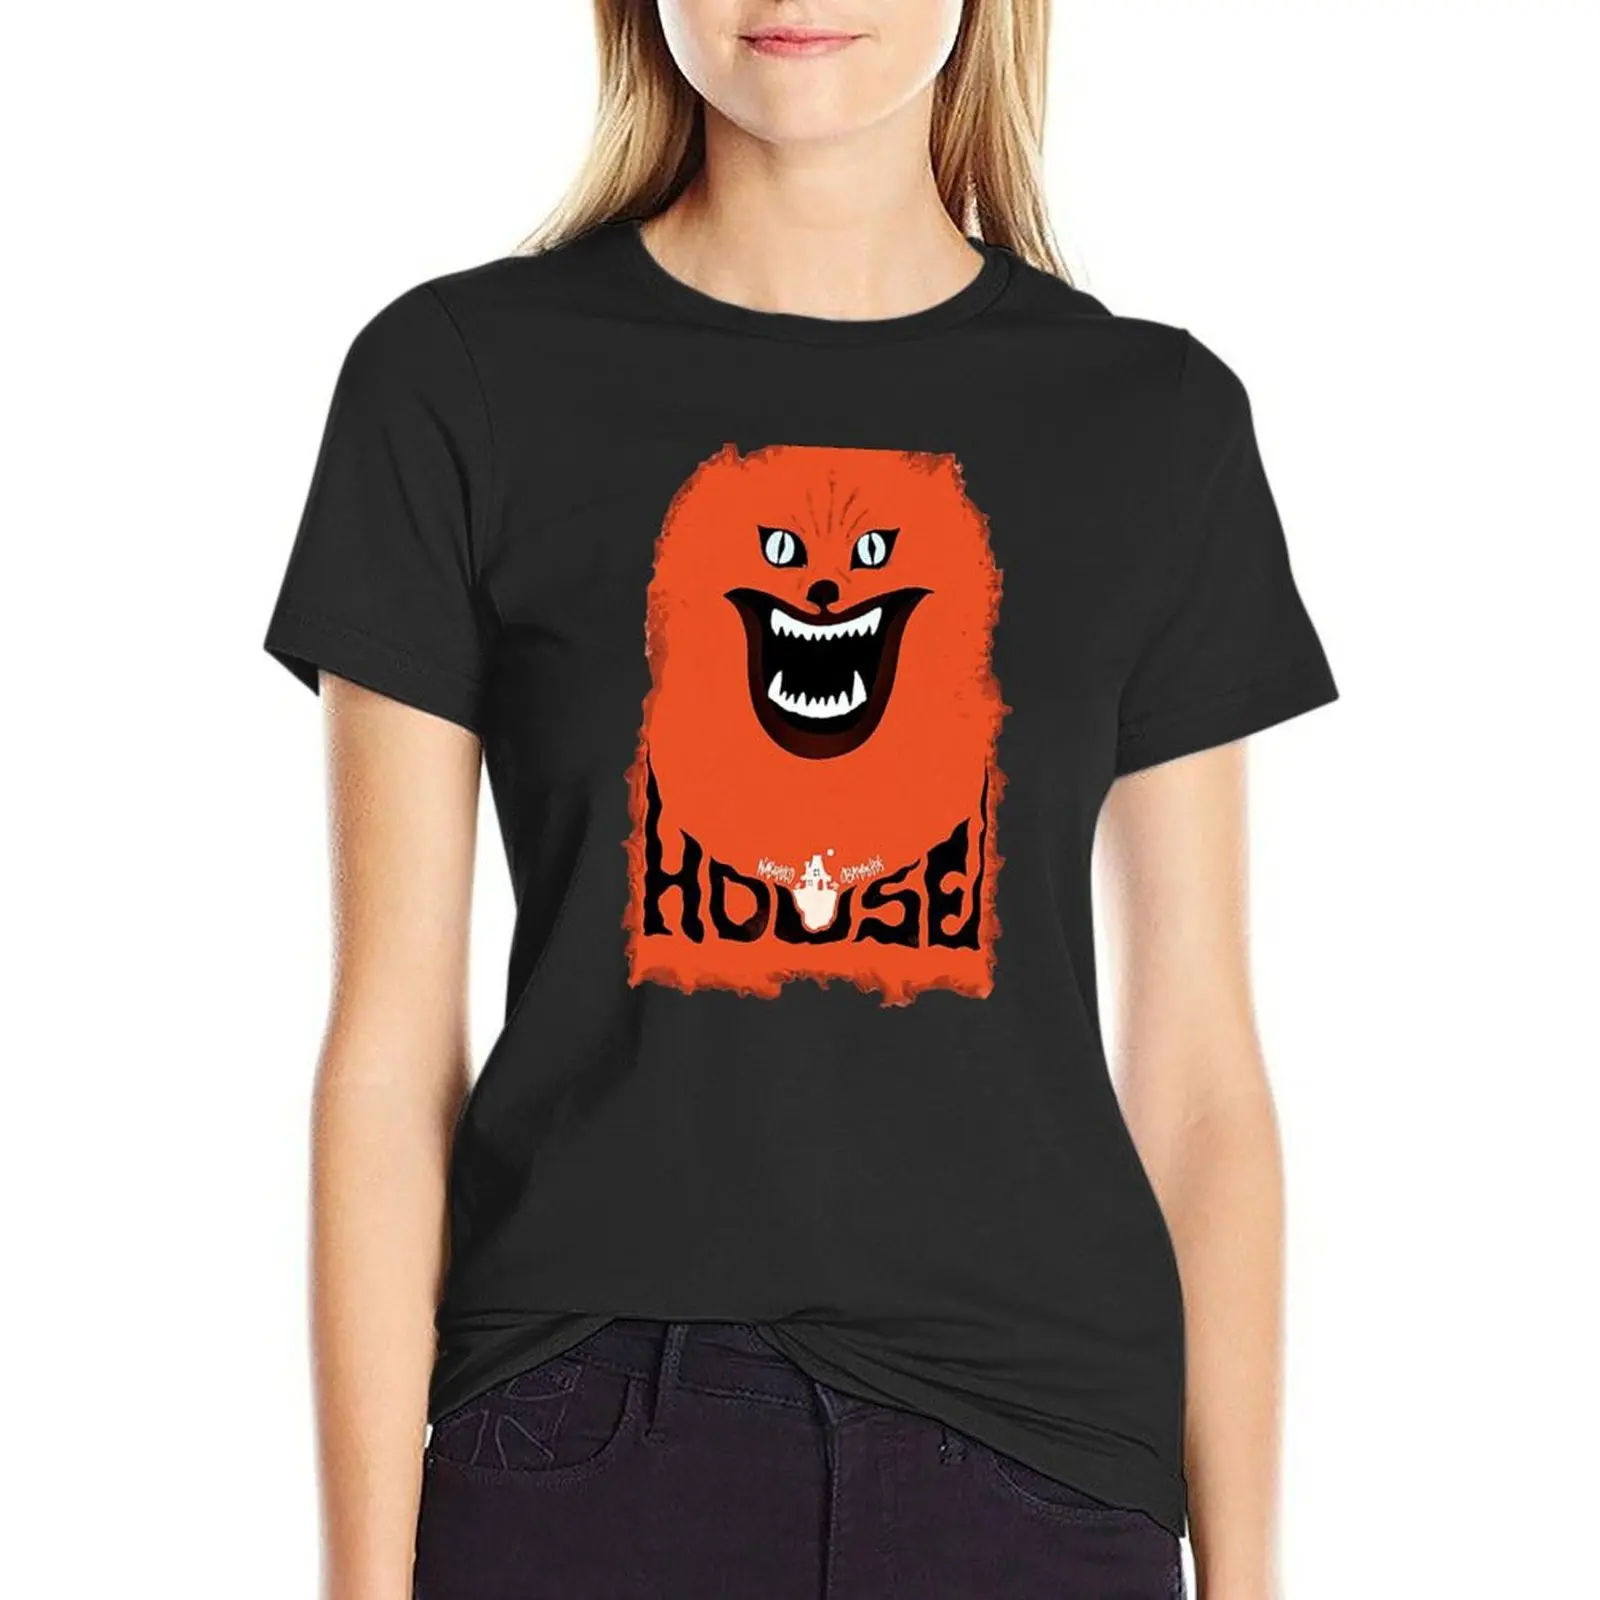 

Hausu (ハウス) Retro Japanese Horror Movie T-shirt Blouse tops rock and roll t shirts for Women